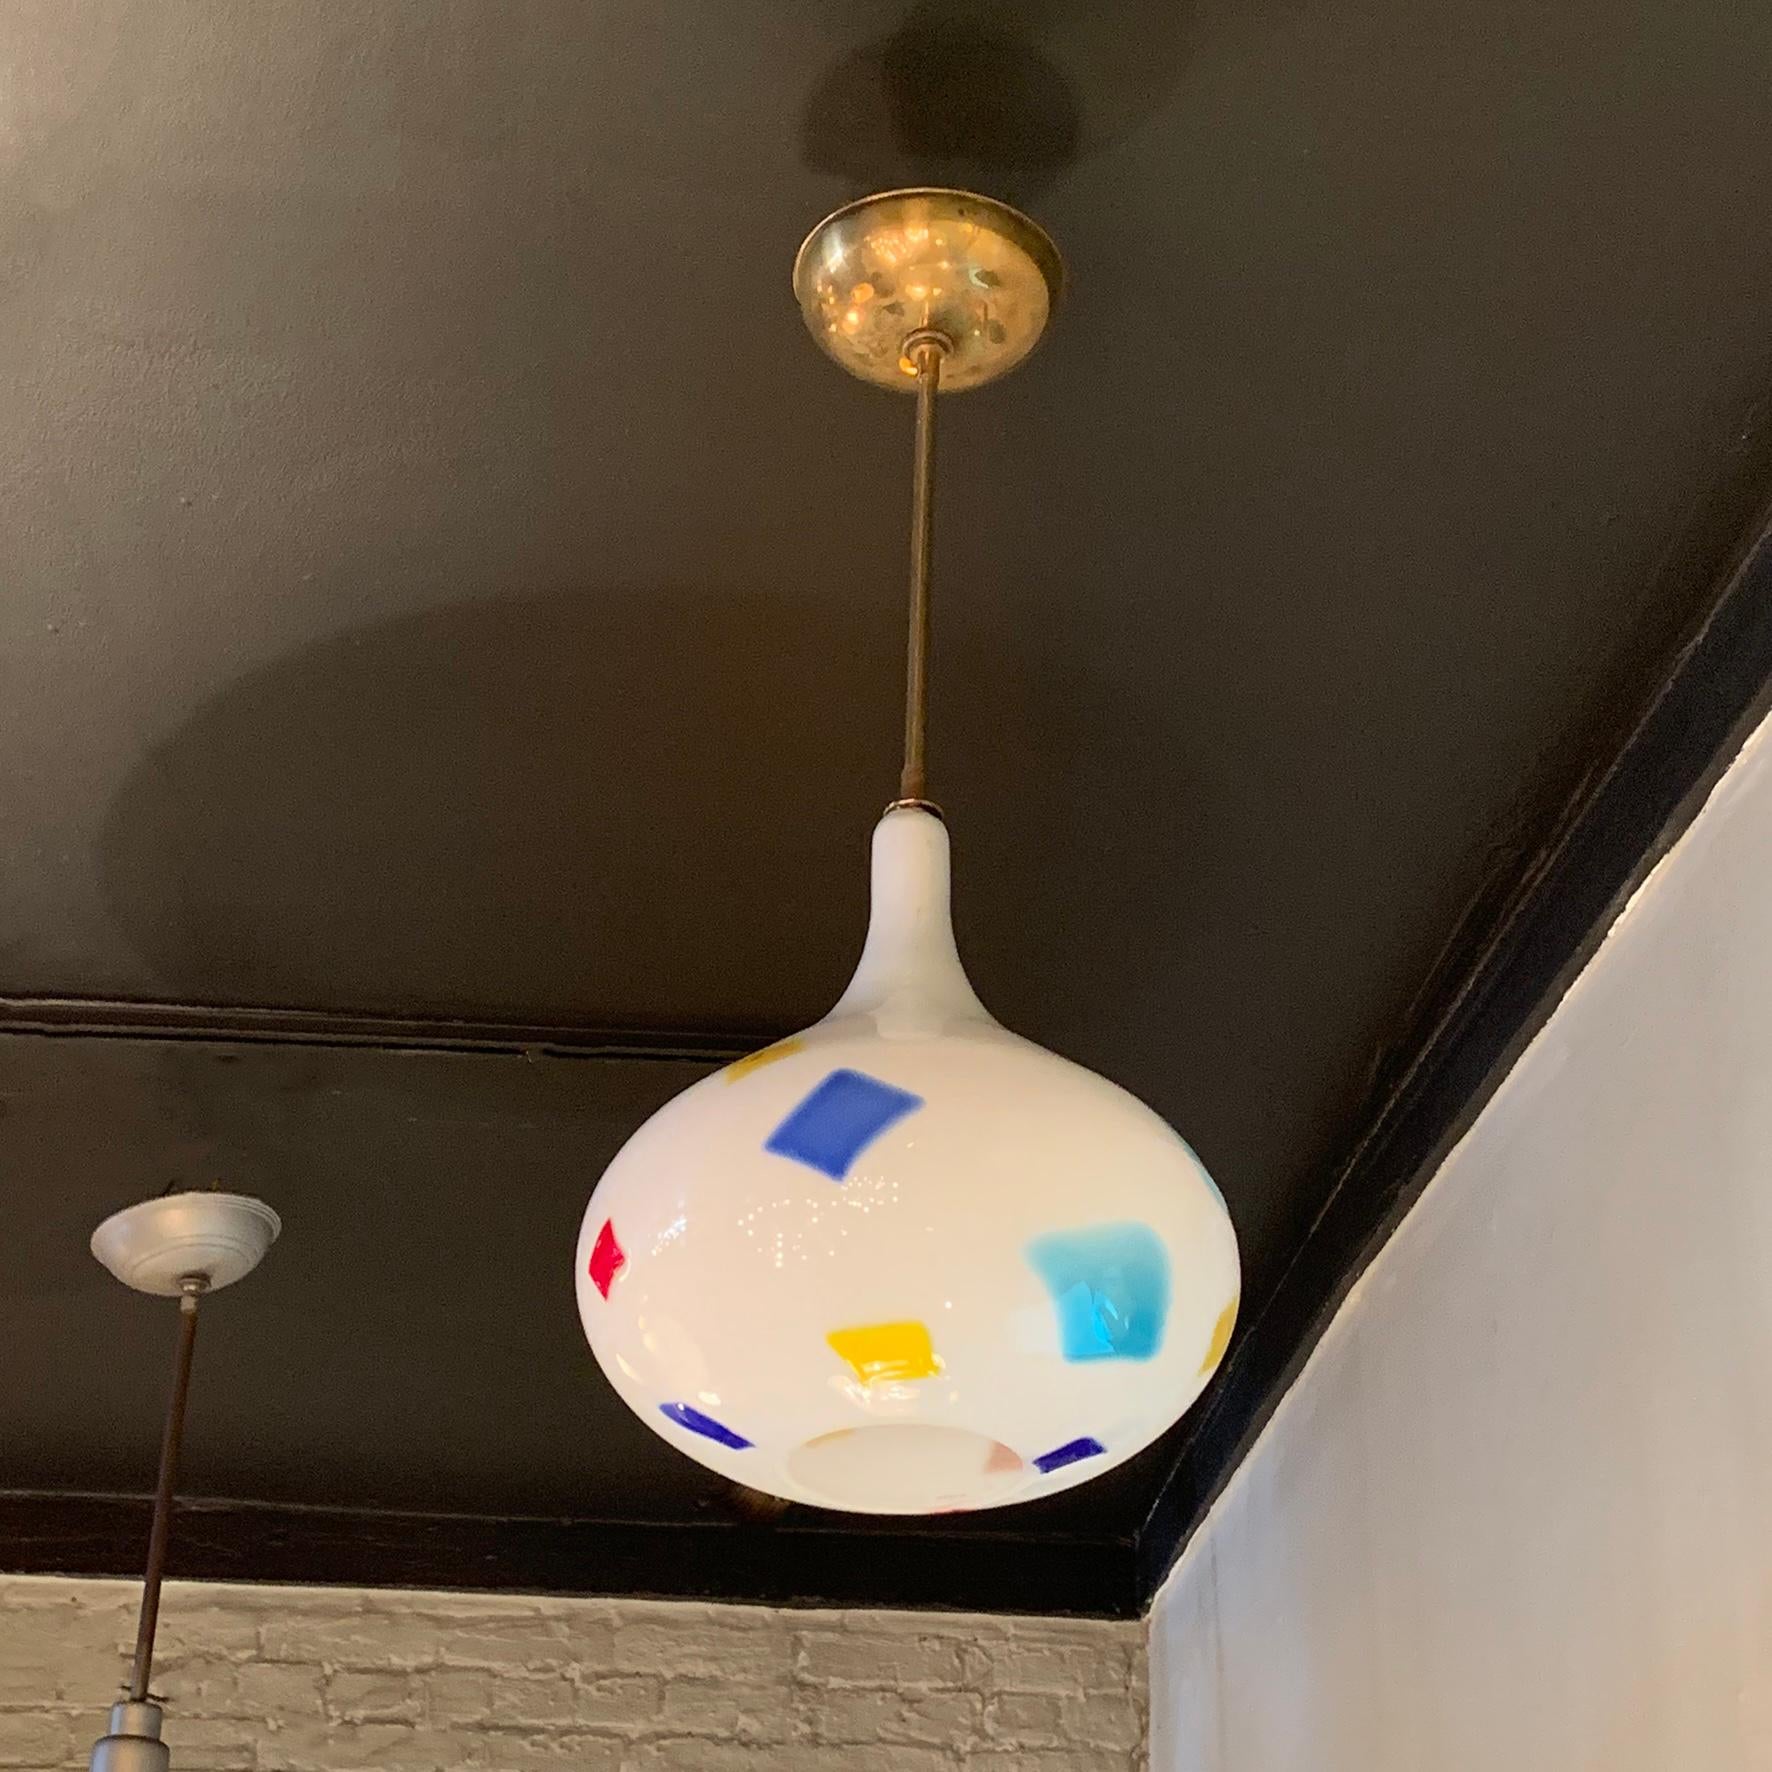 Italian, Mid-Century Modern, Murano glass pendant light attributed to Anzolo Fuga for AVeM (Artistica Vetreria Murano) features an onion shaped, white opaque glass shade embedded with patches of color on a brass pole with ceiling canopy, wired to